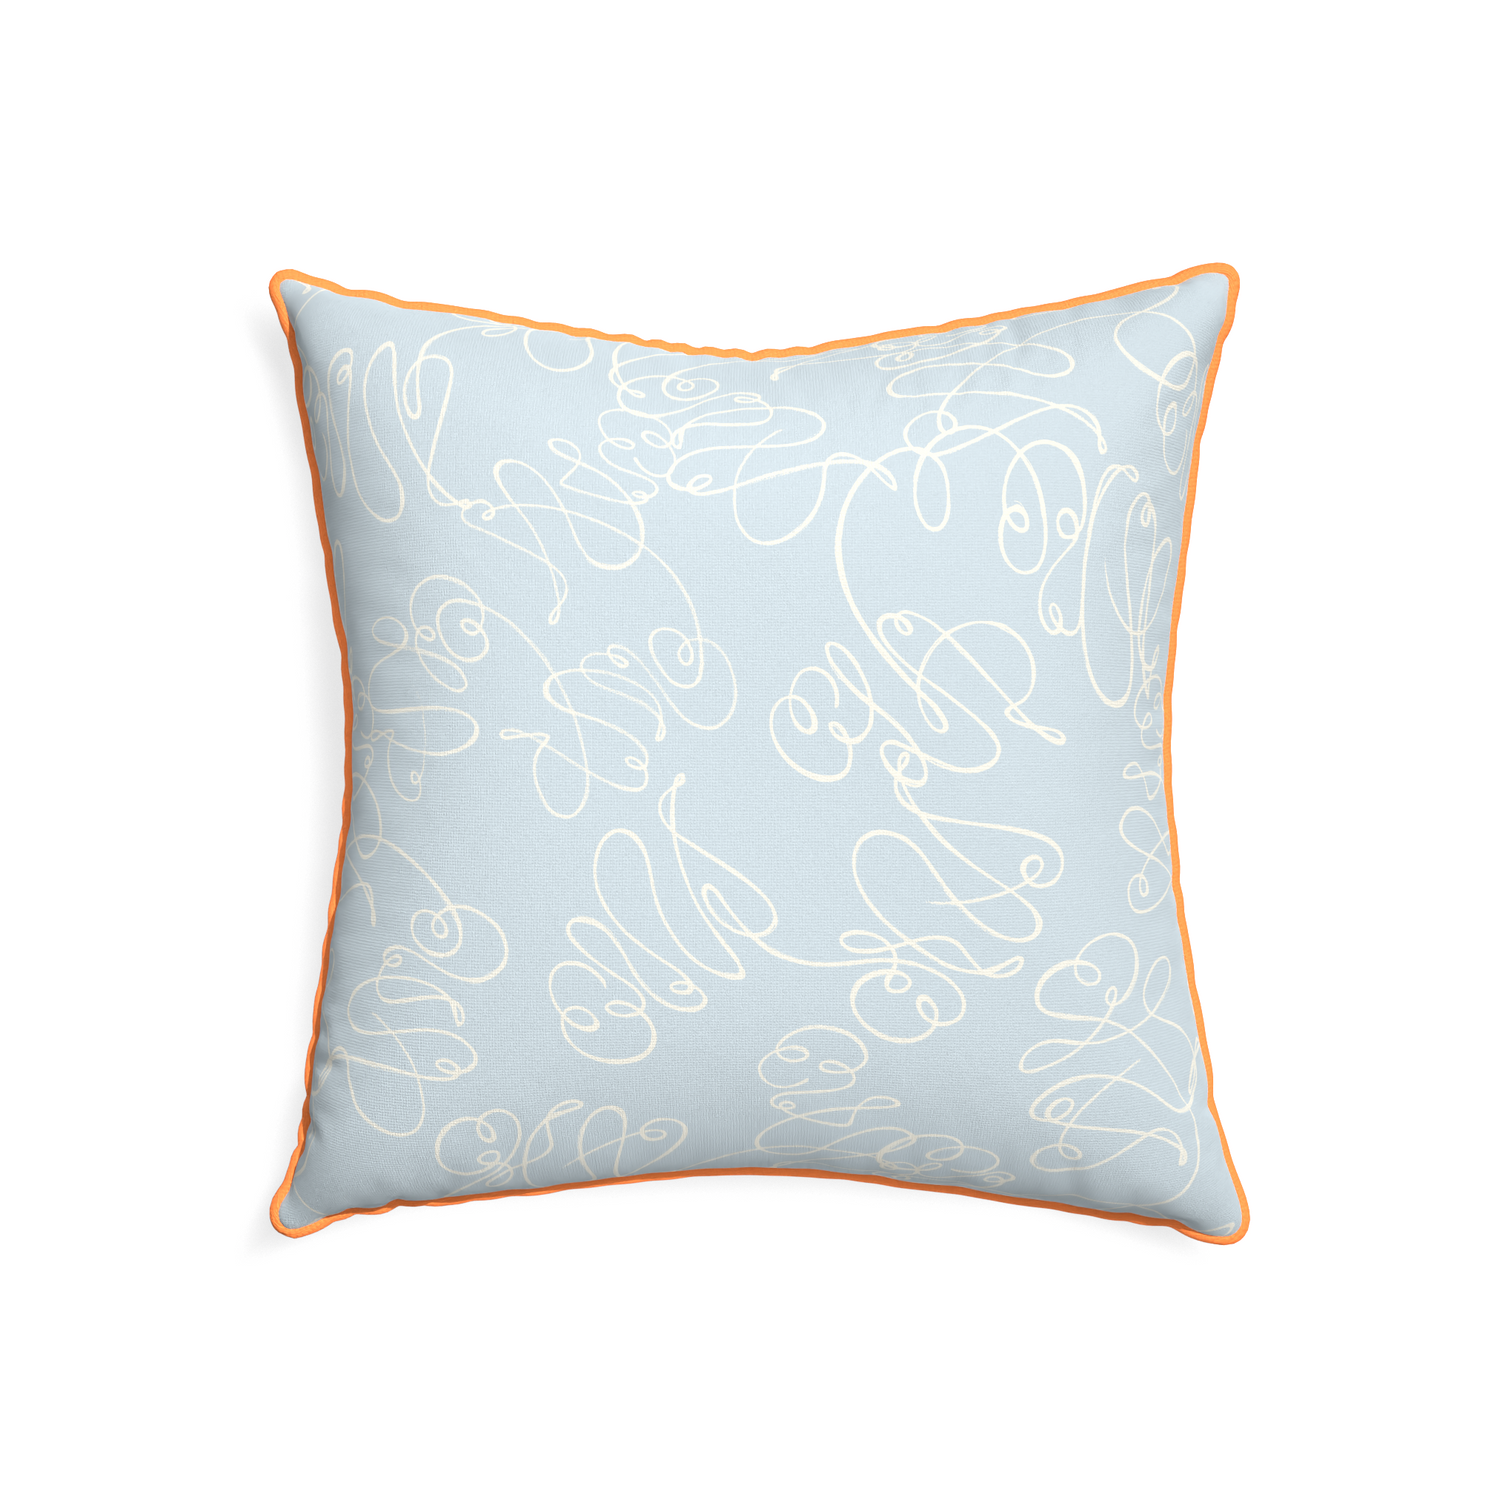 22-square mirabella custom pillow with clementine piping on white background